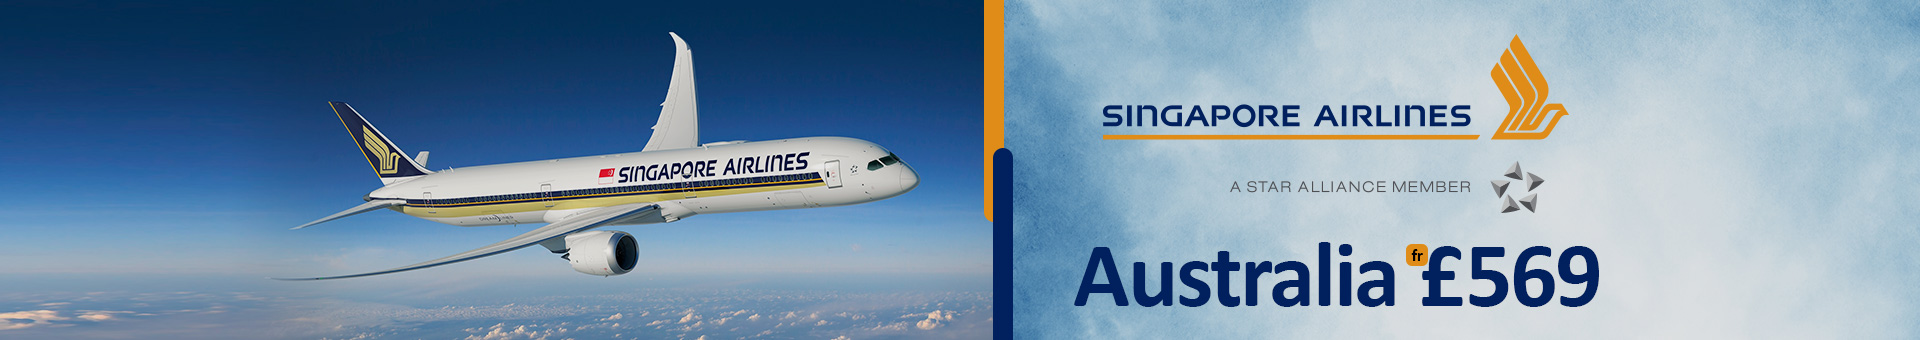 Singapore Airlines Flight Tickets | Singapore Airlines Flight Deals and